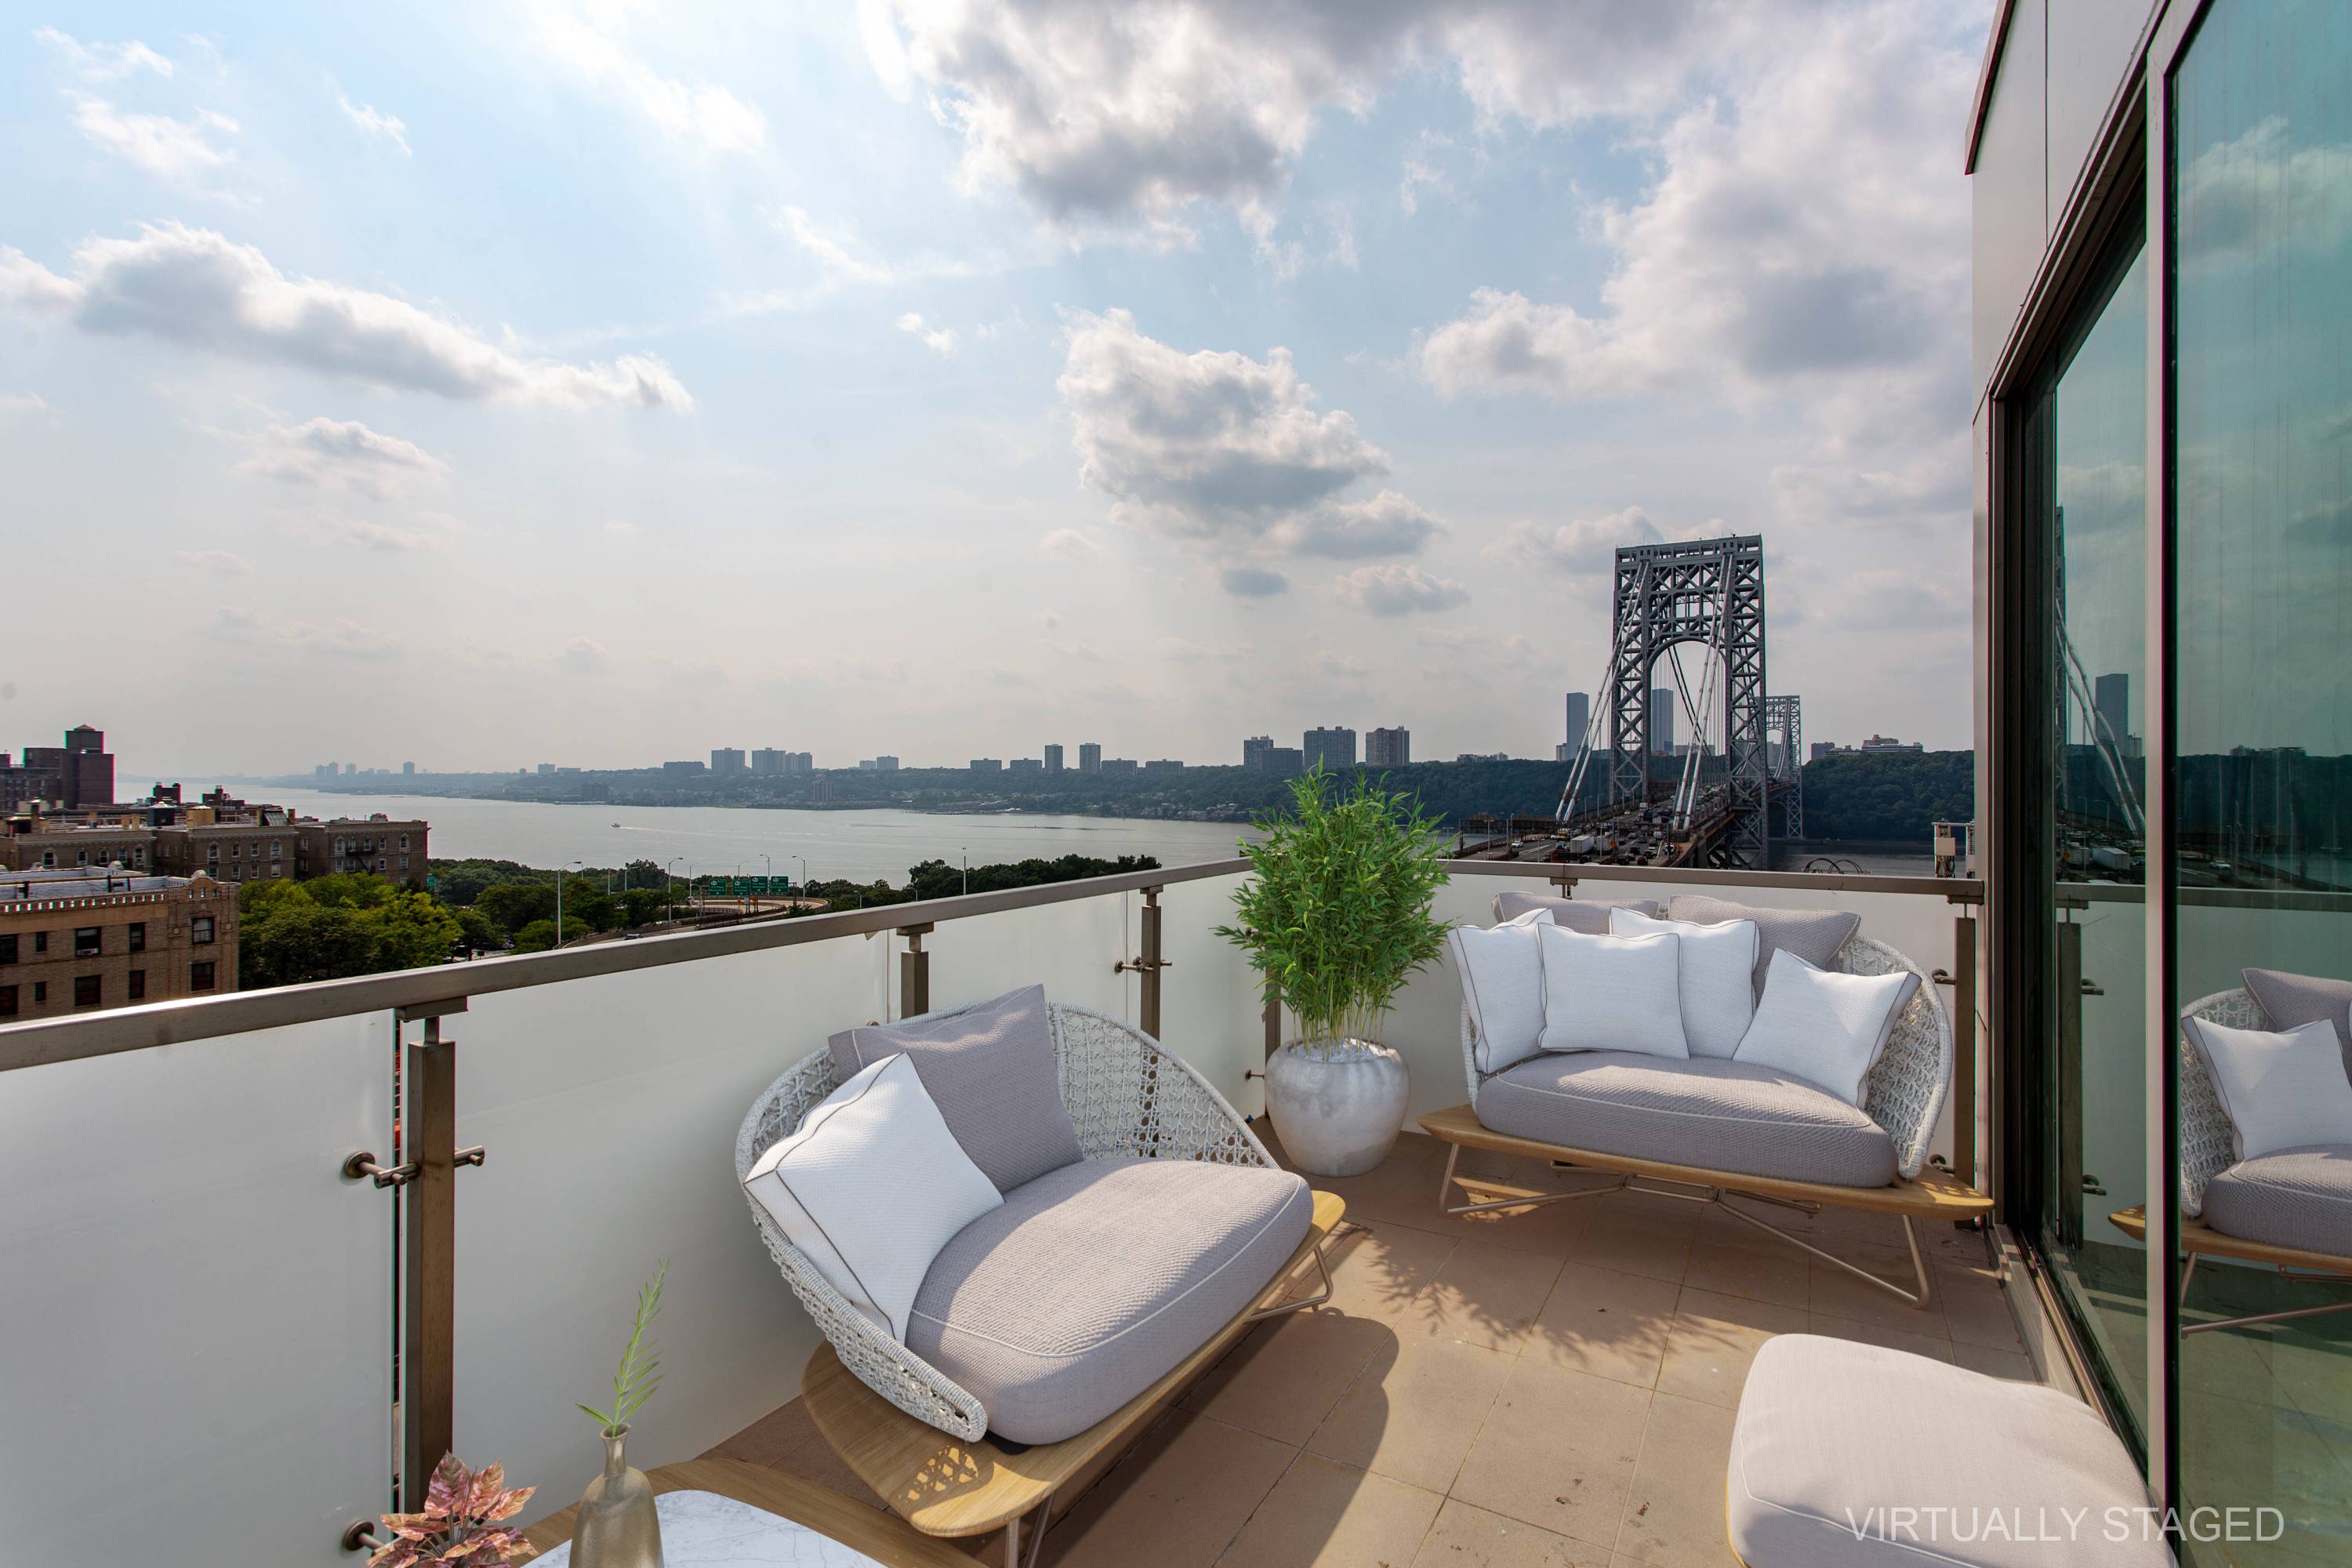 With sweeping views over the Hudson, Penthouse 8A is a large two bedroom, two full bathroom featuring floor to ceiling triple paned windows and a 281 SF private terrace.